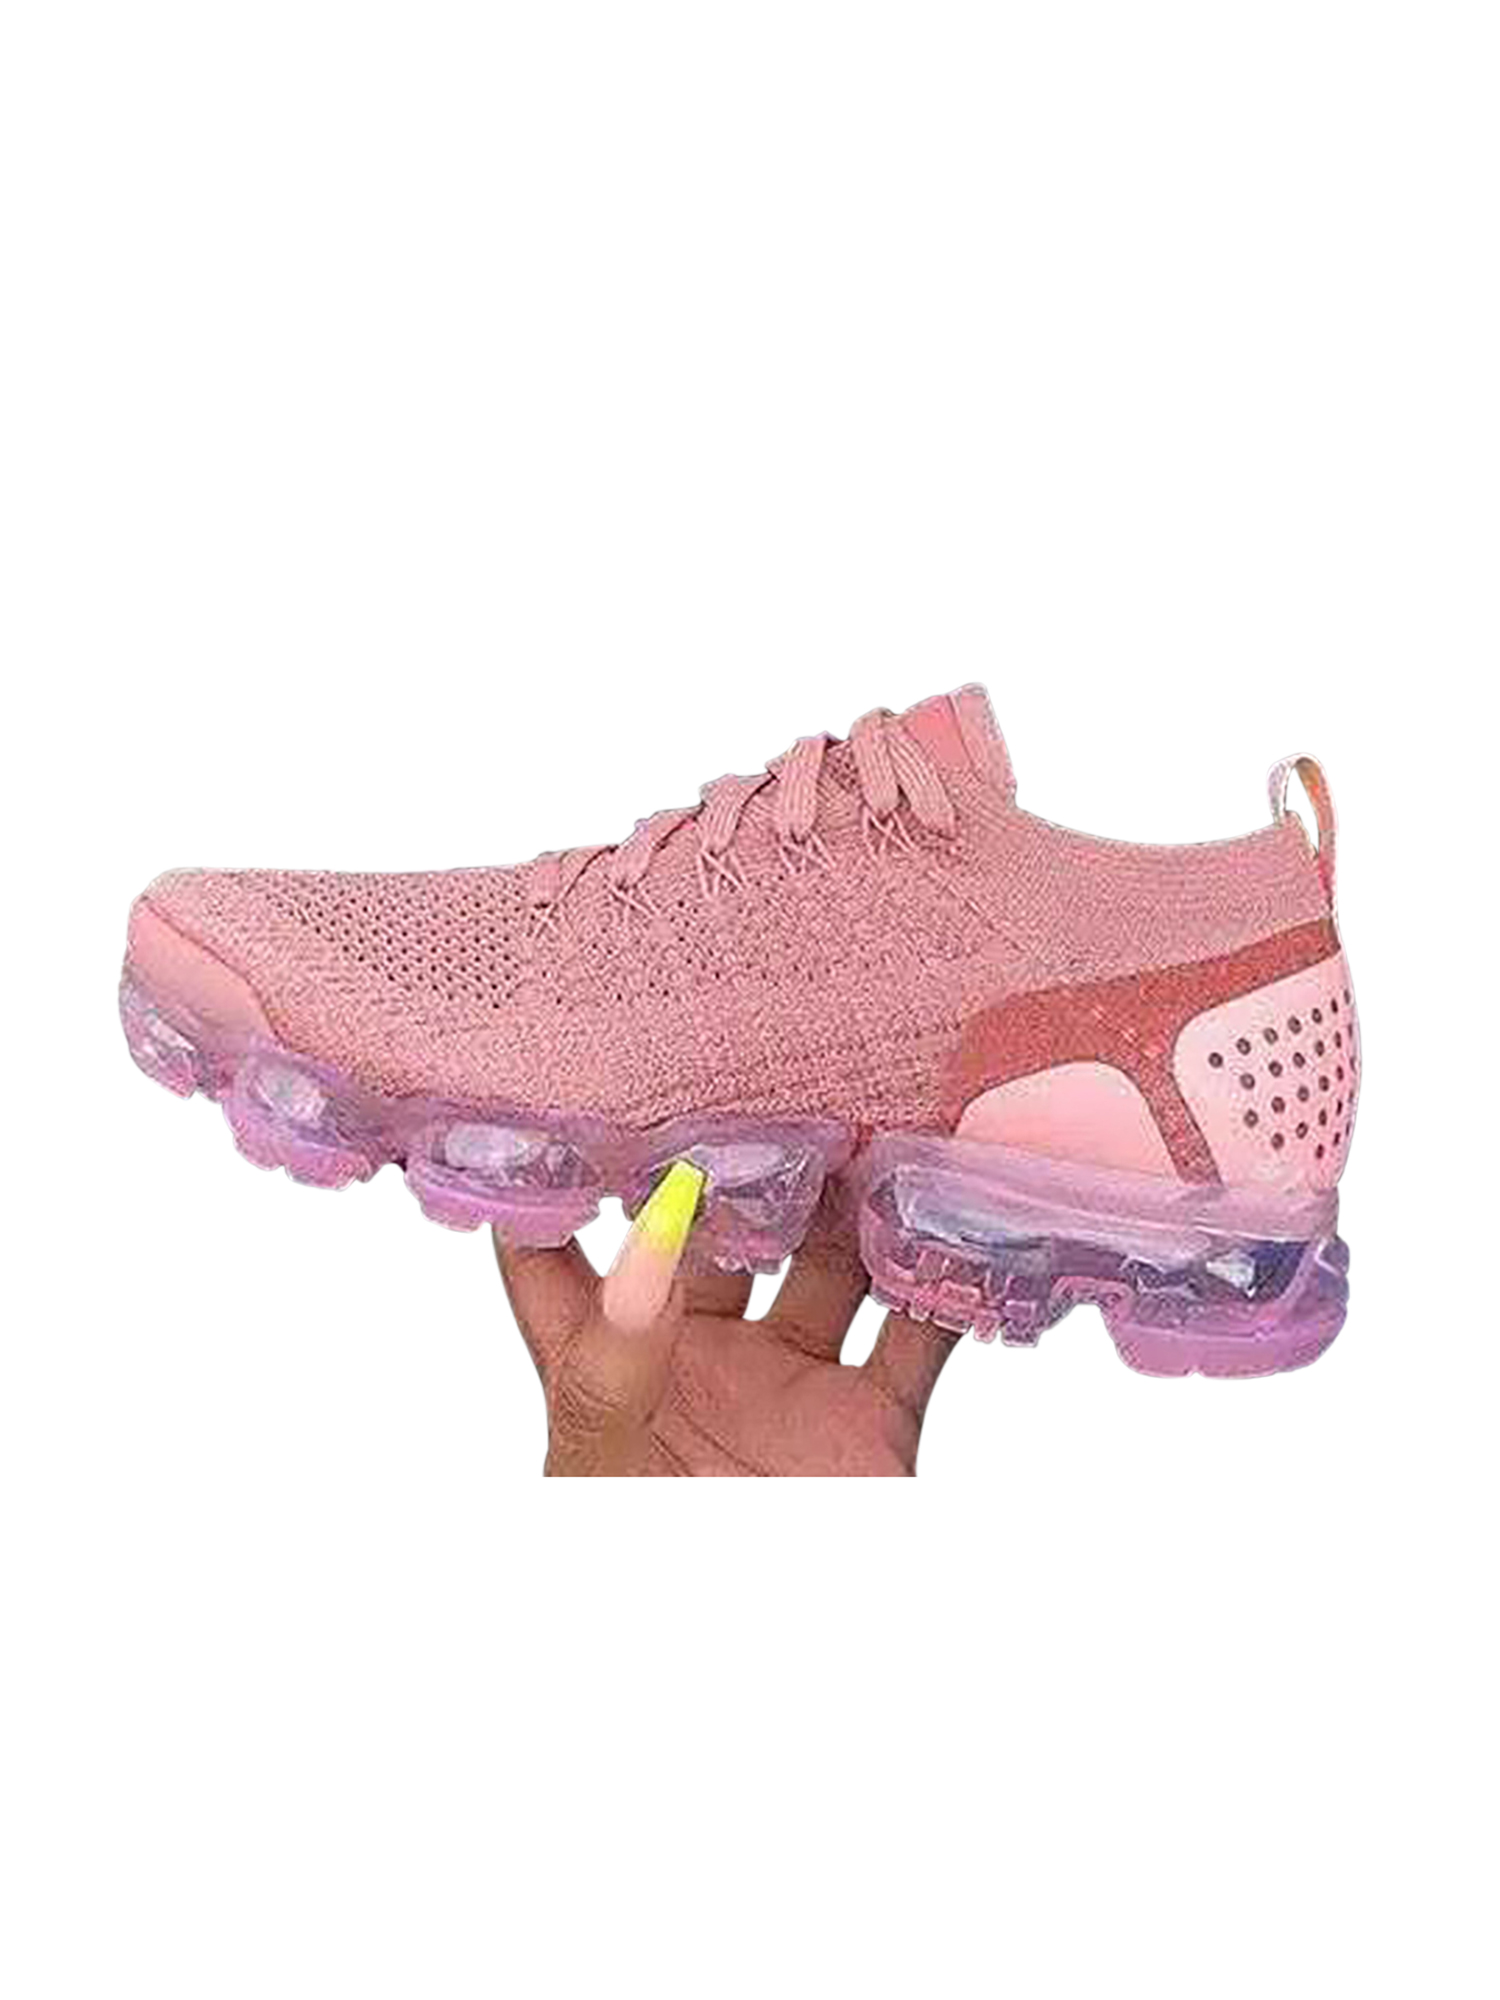 Details about  / Women/'s Sports Running Gym Athletic Comfort Shoes Walking Casual  Flat shoes